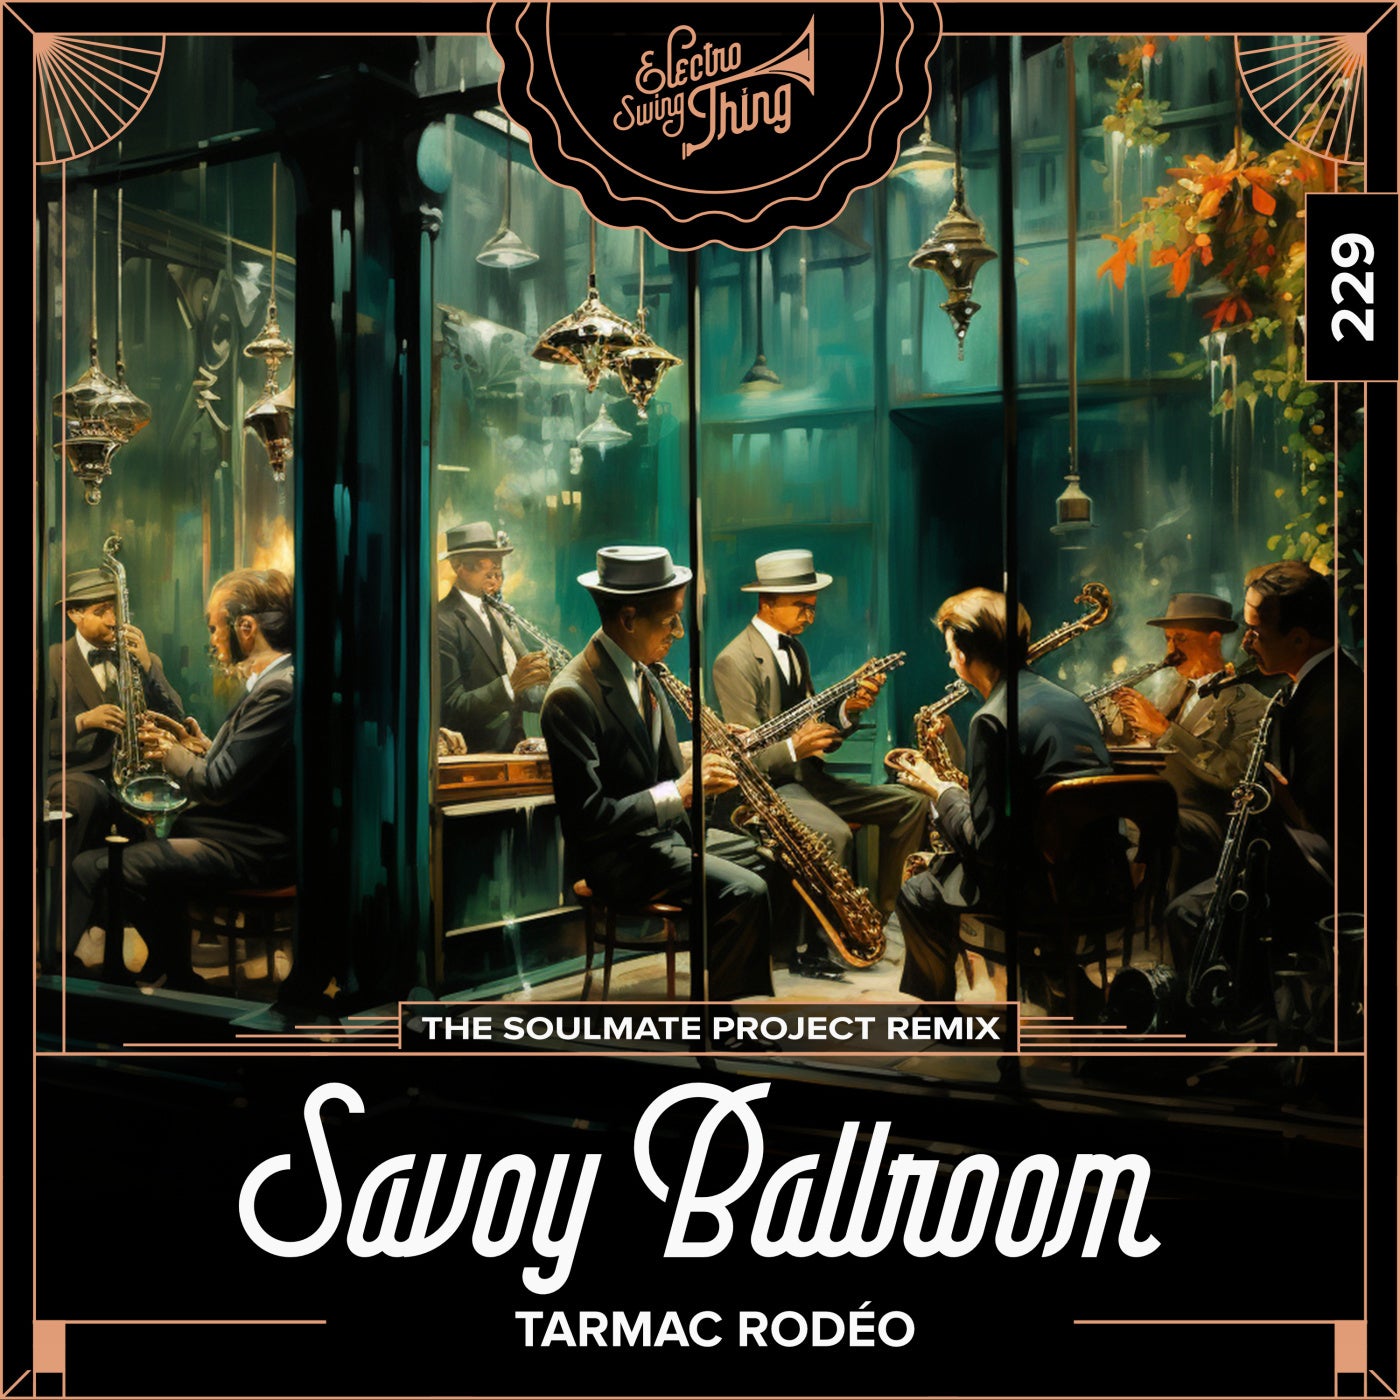 Savoy Ballroom (The Soulmate Project Remix)